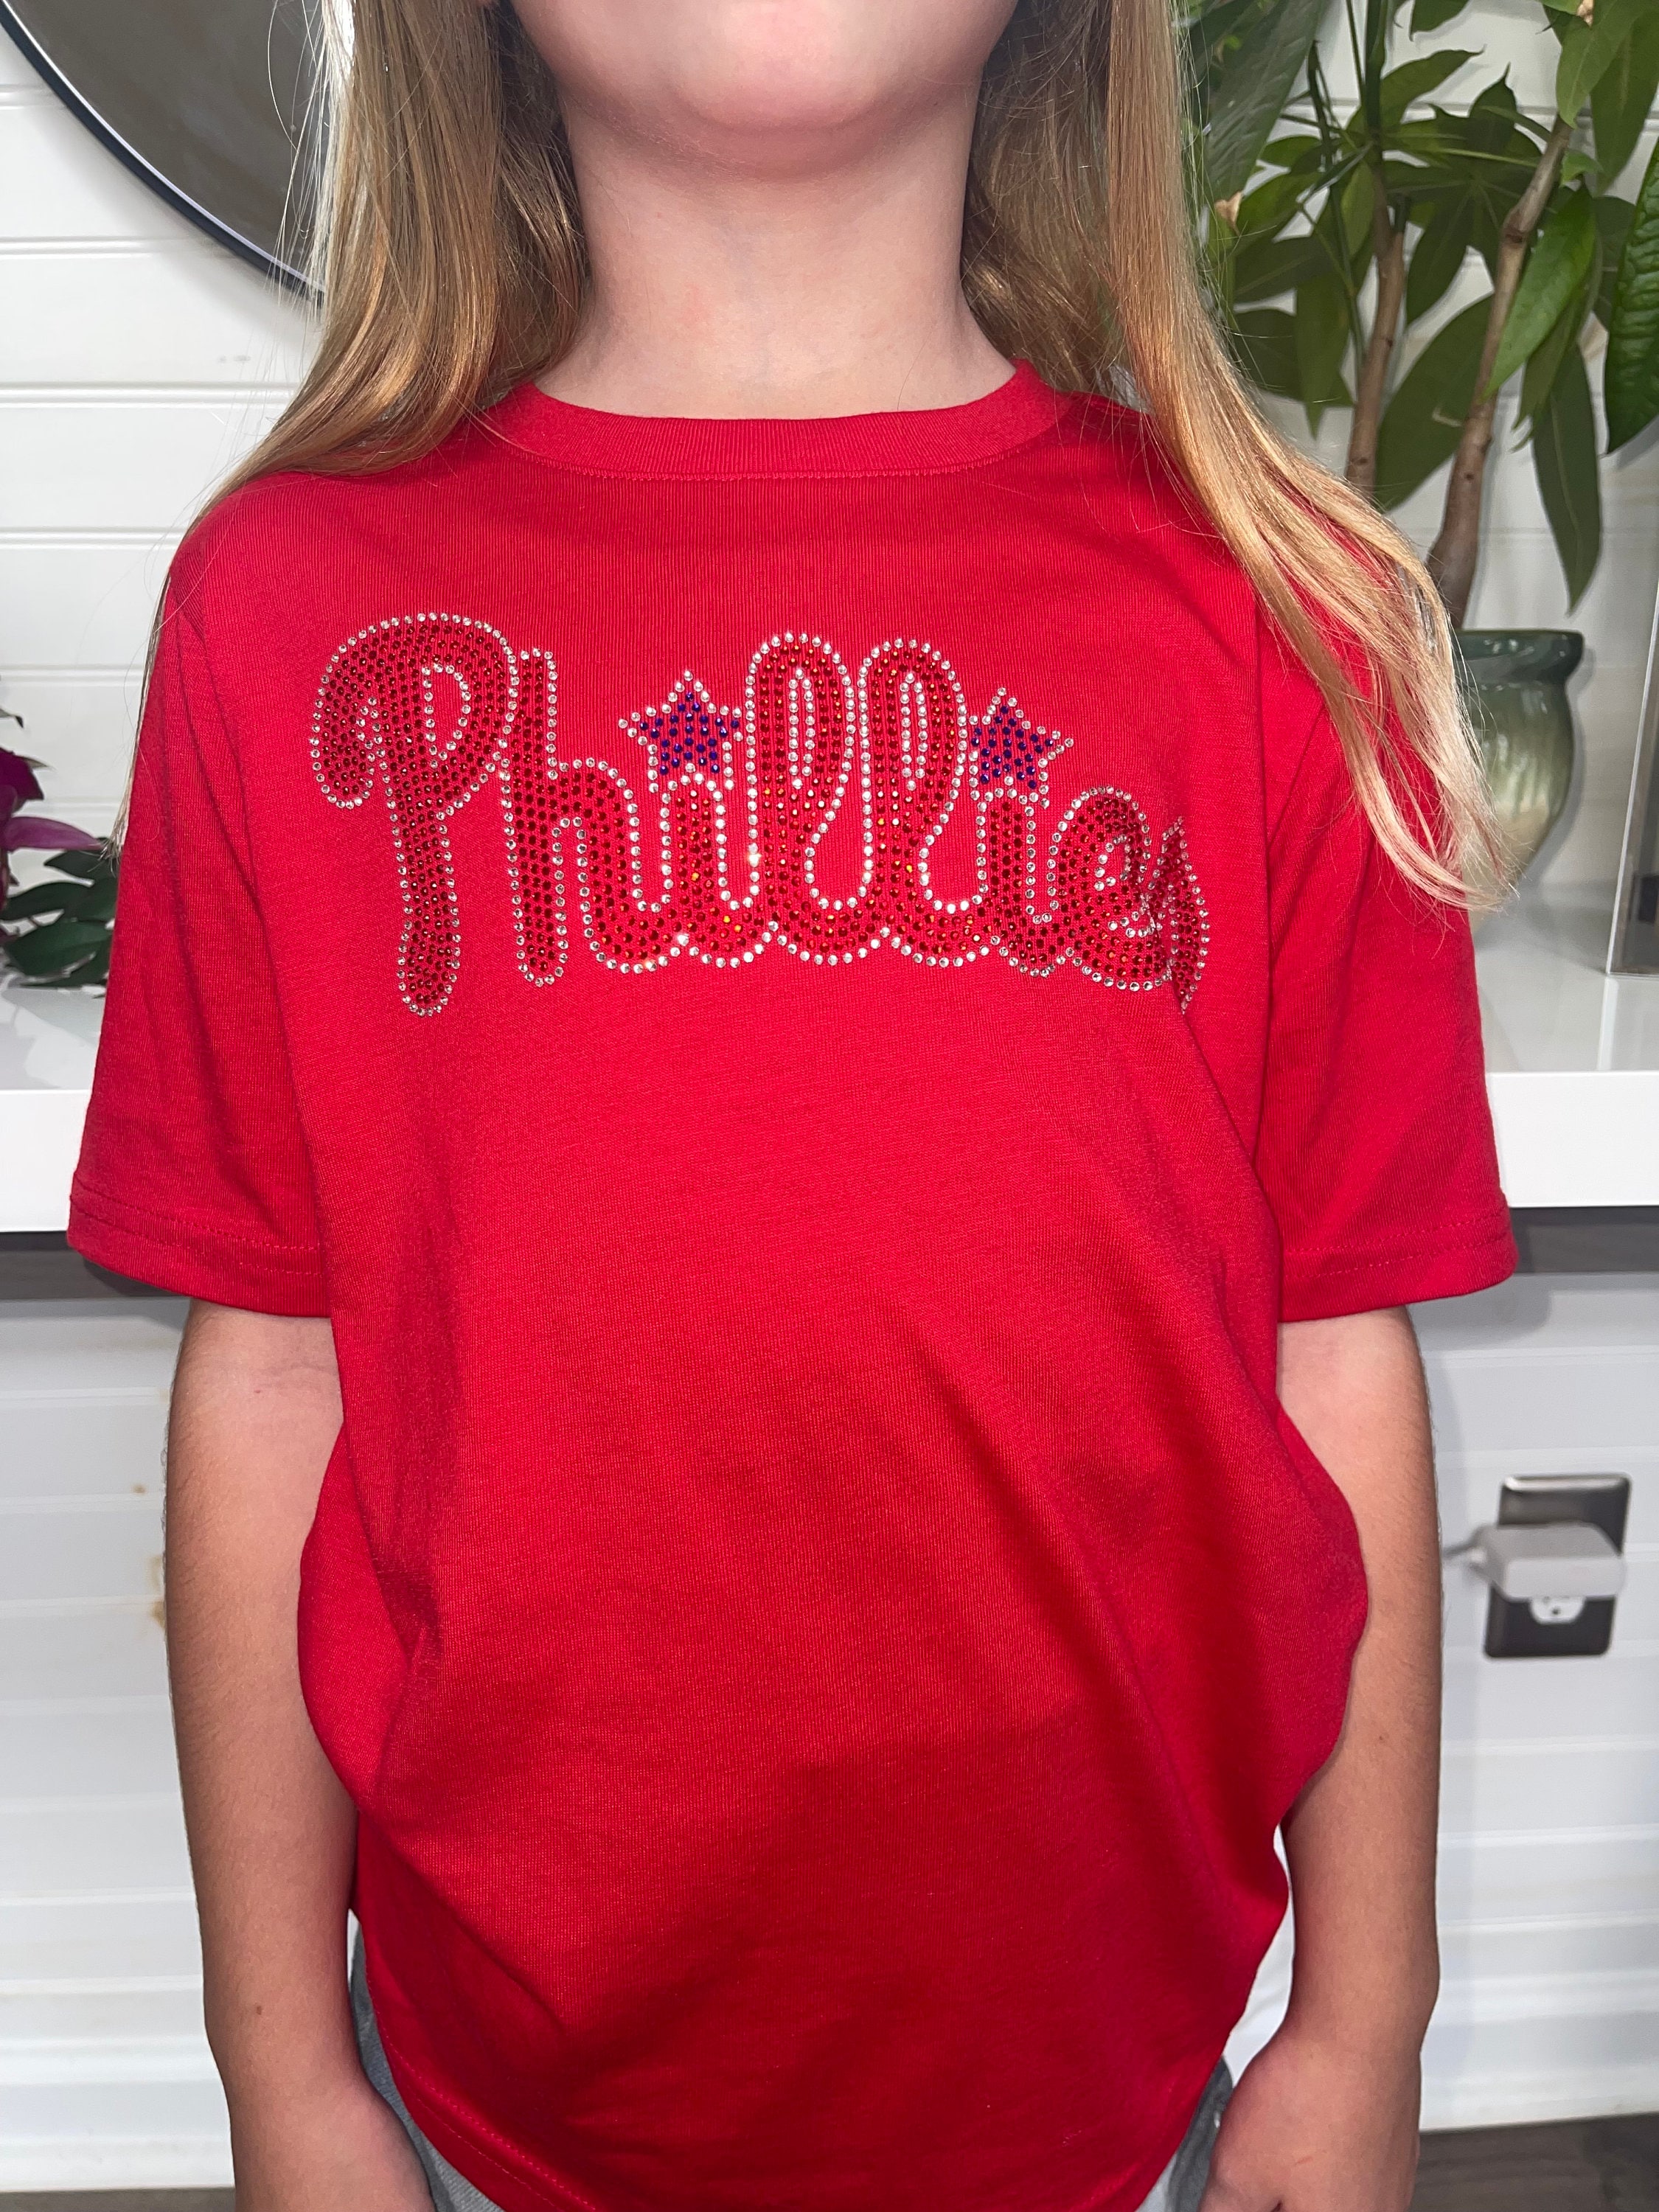 Youth Philadelphia Phillies T Shirt & Face Covering Shirt - Limotees